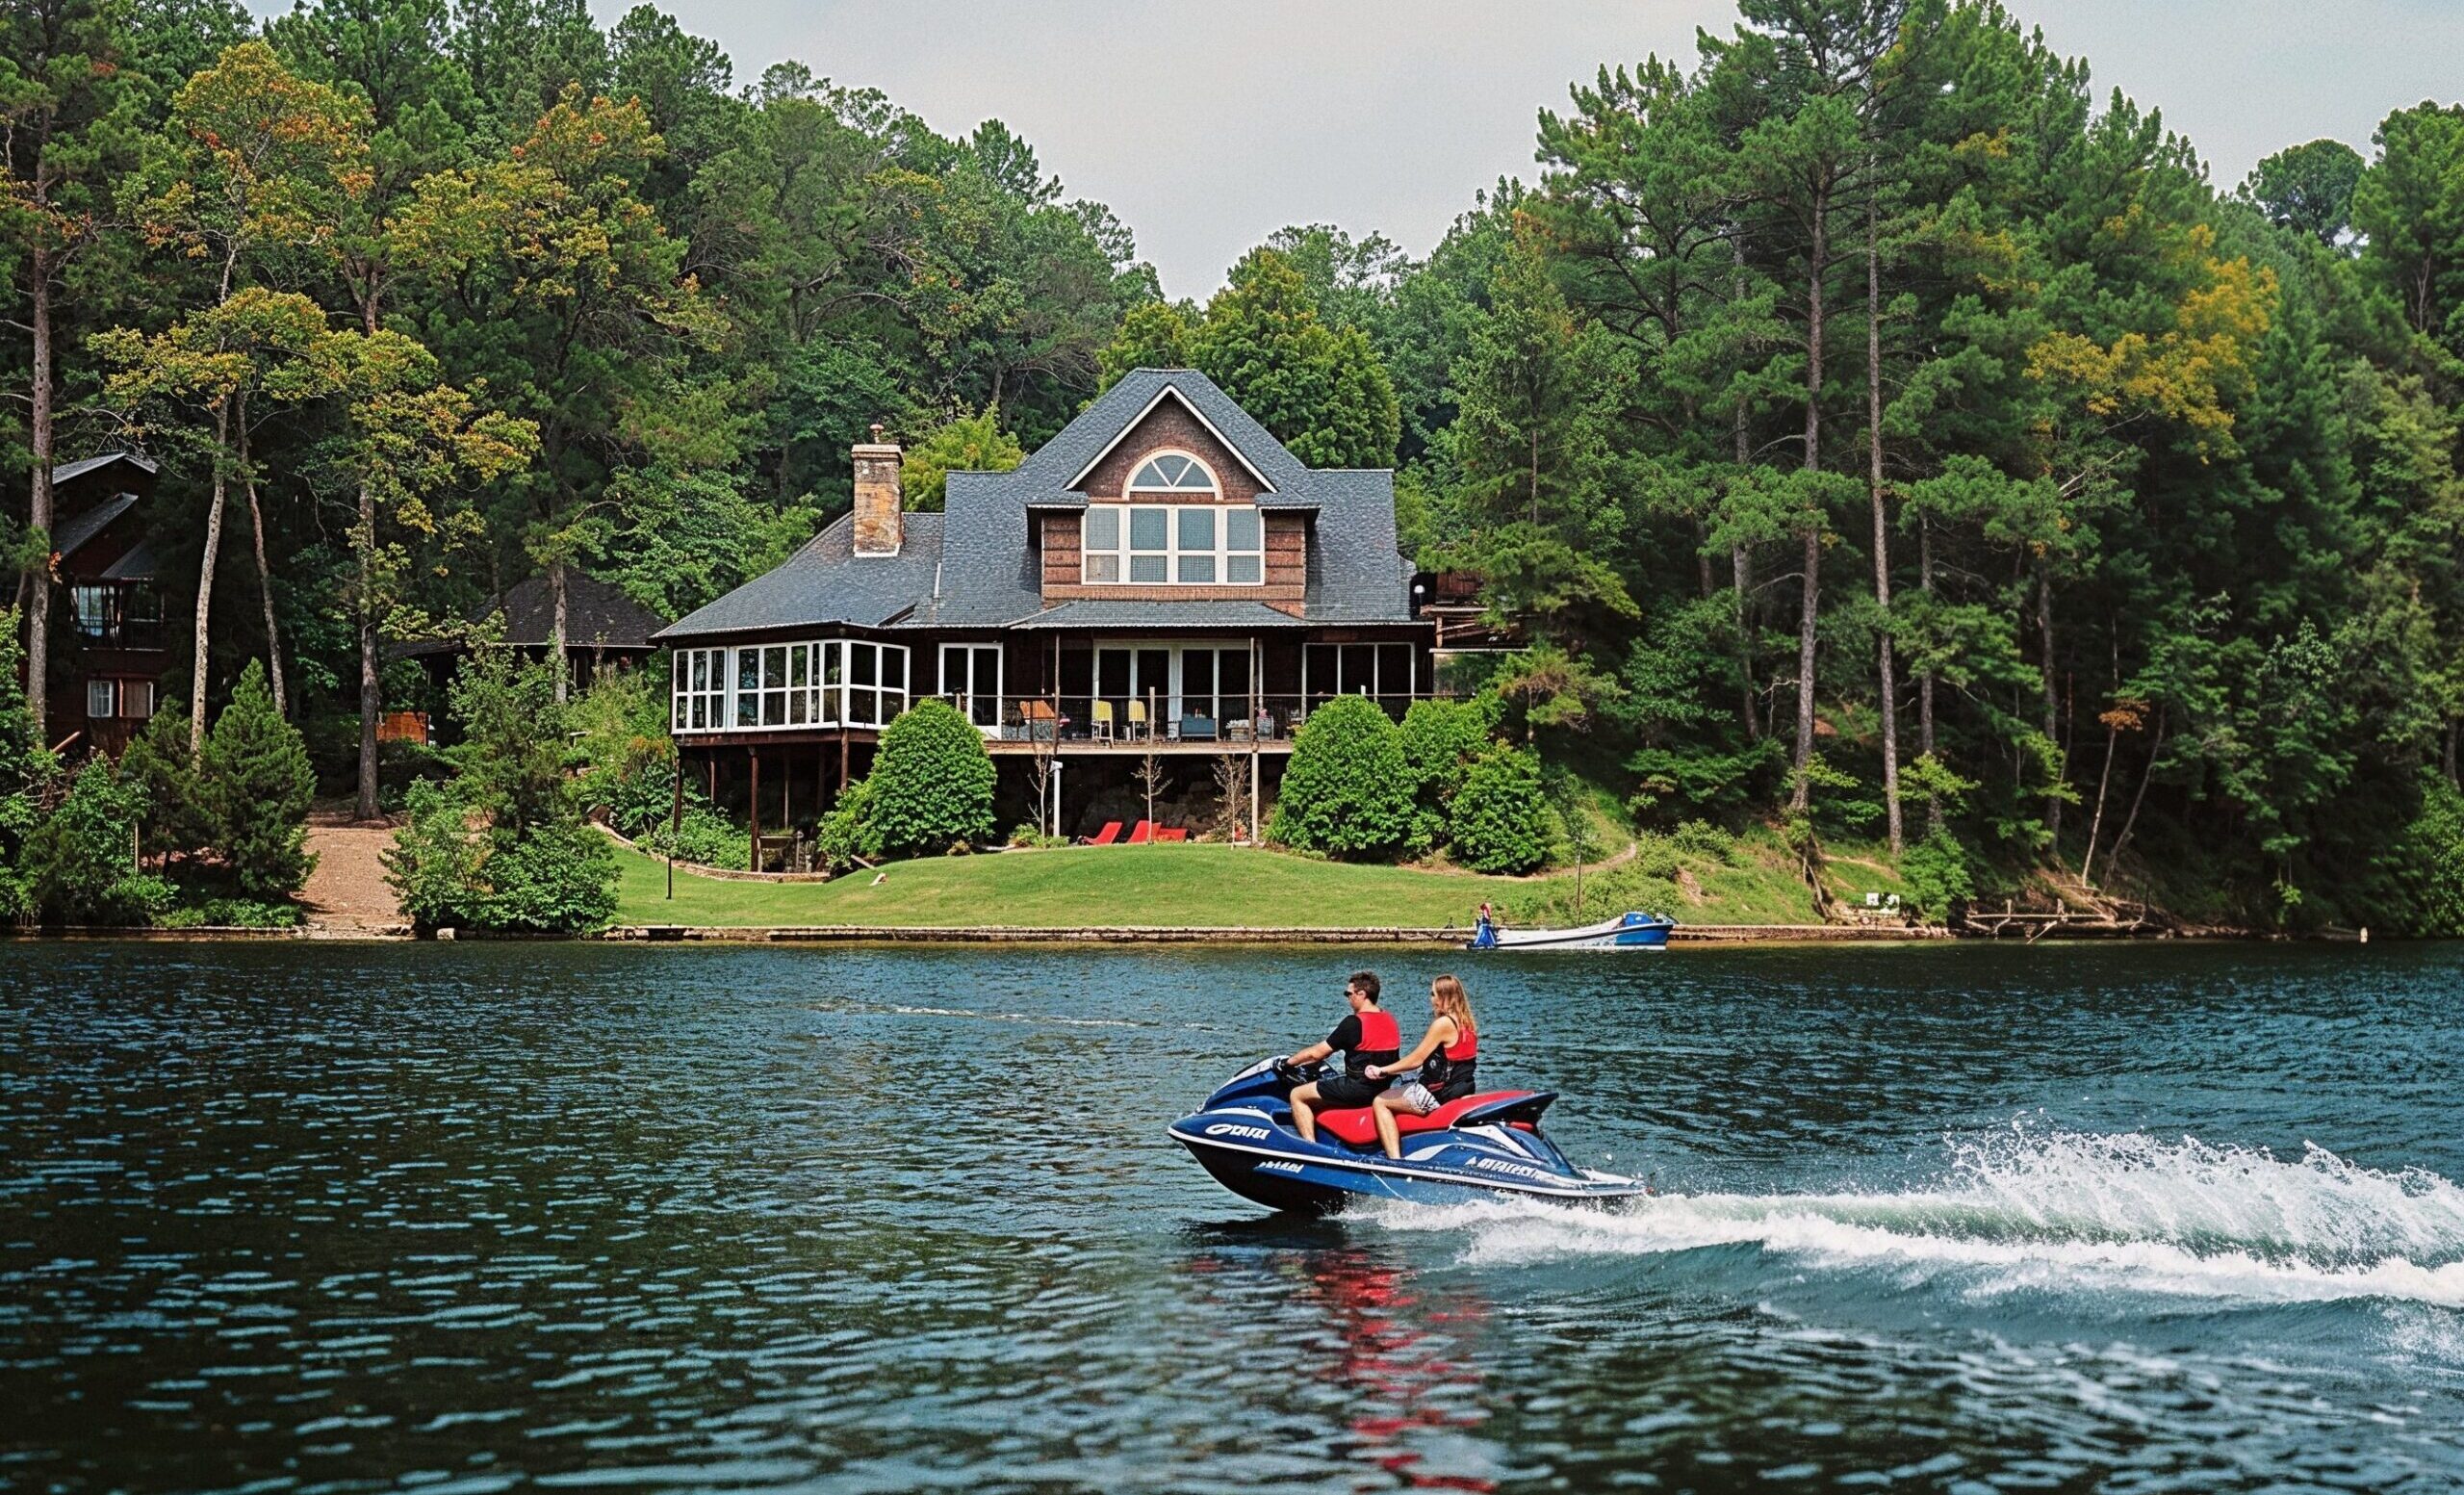 People on a Jet Ski in Front of Their Vacation Home